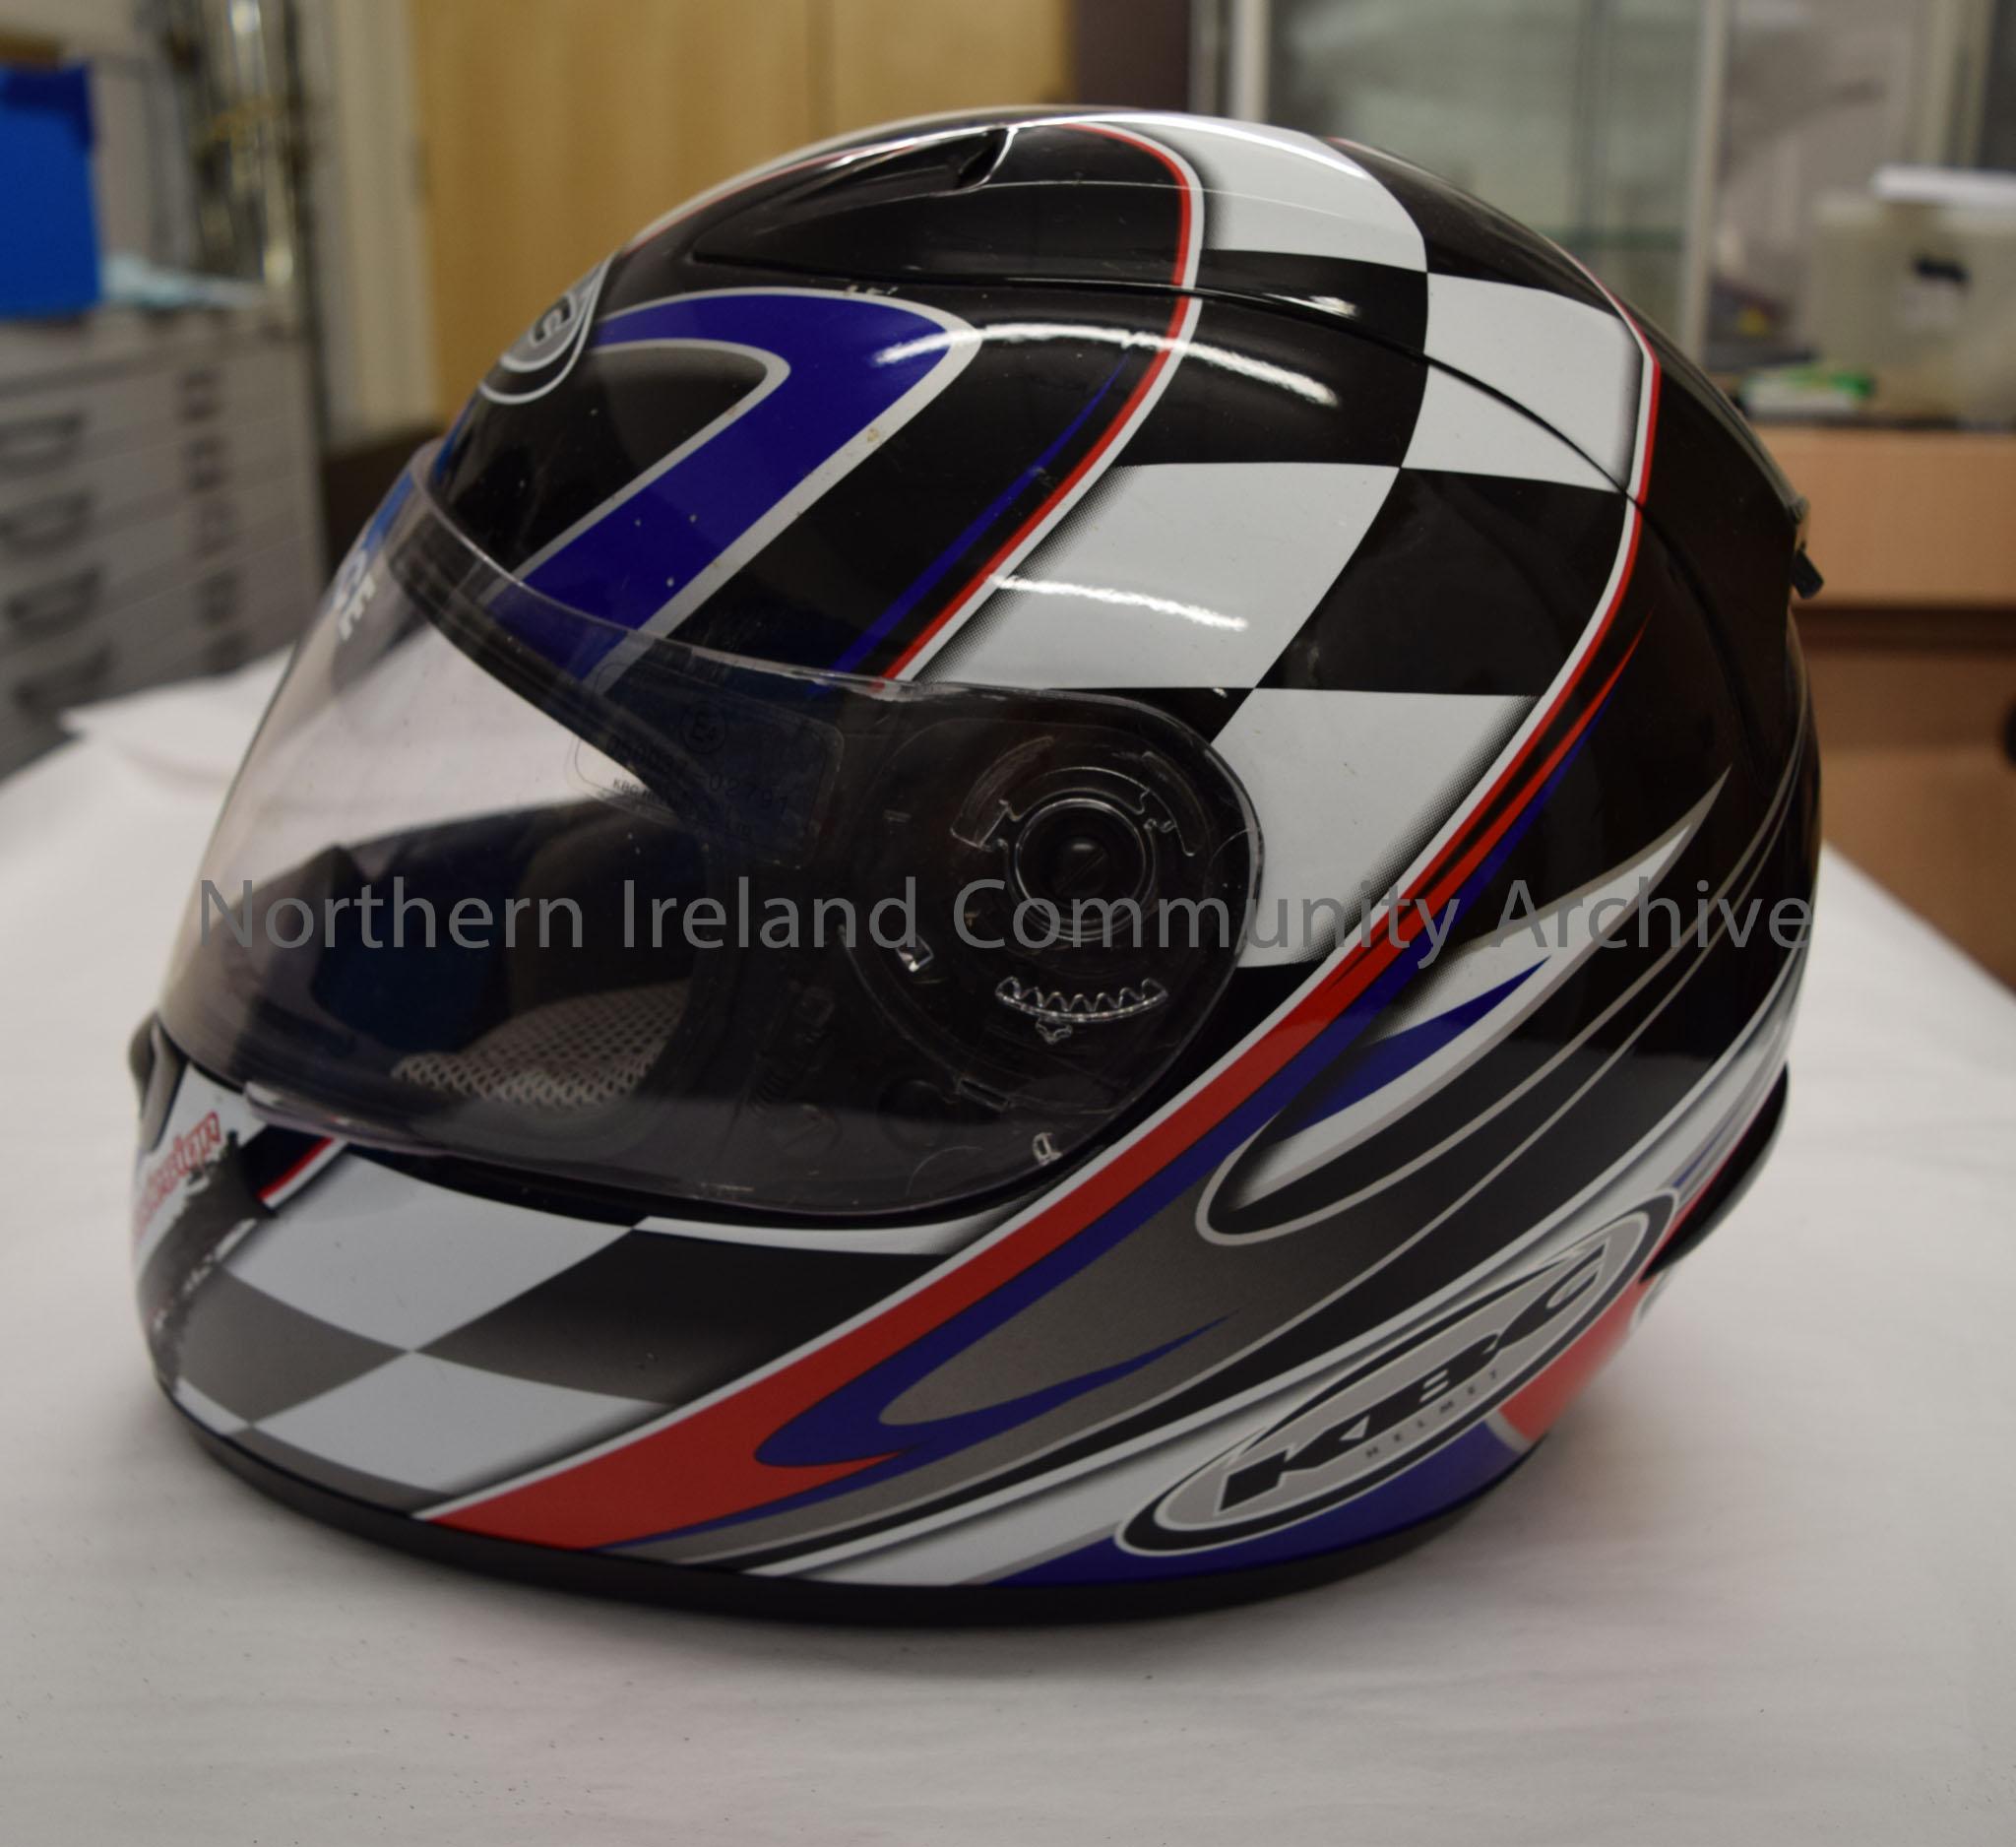 KBC motorcycle helmet belonging to Keith Bruce. Black and white chequered pattern with blue and red stripes. – 2016.75 (3)